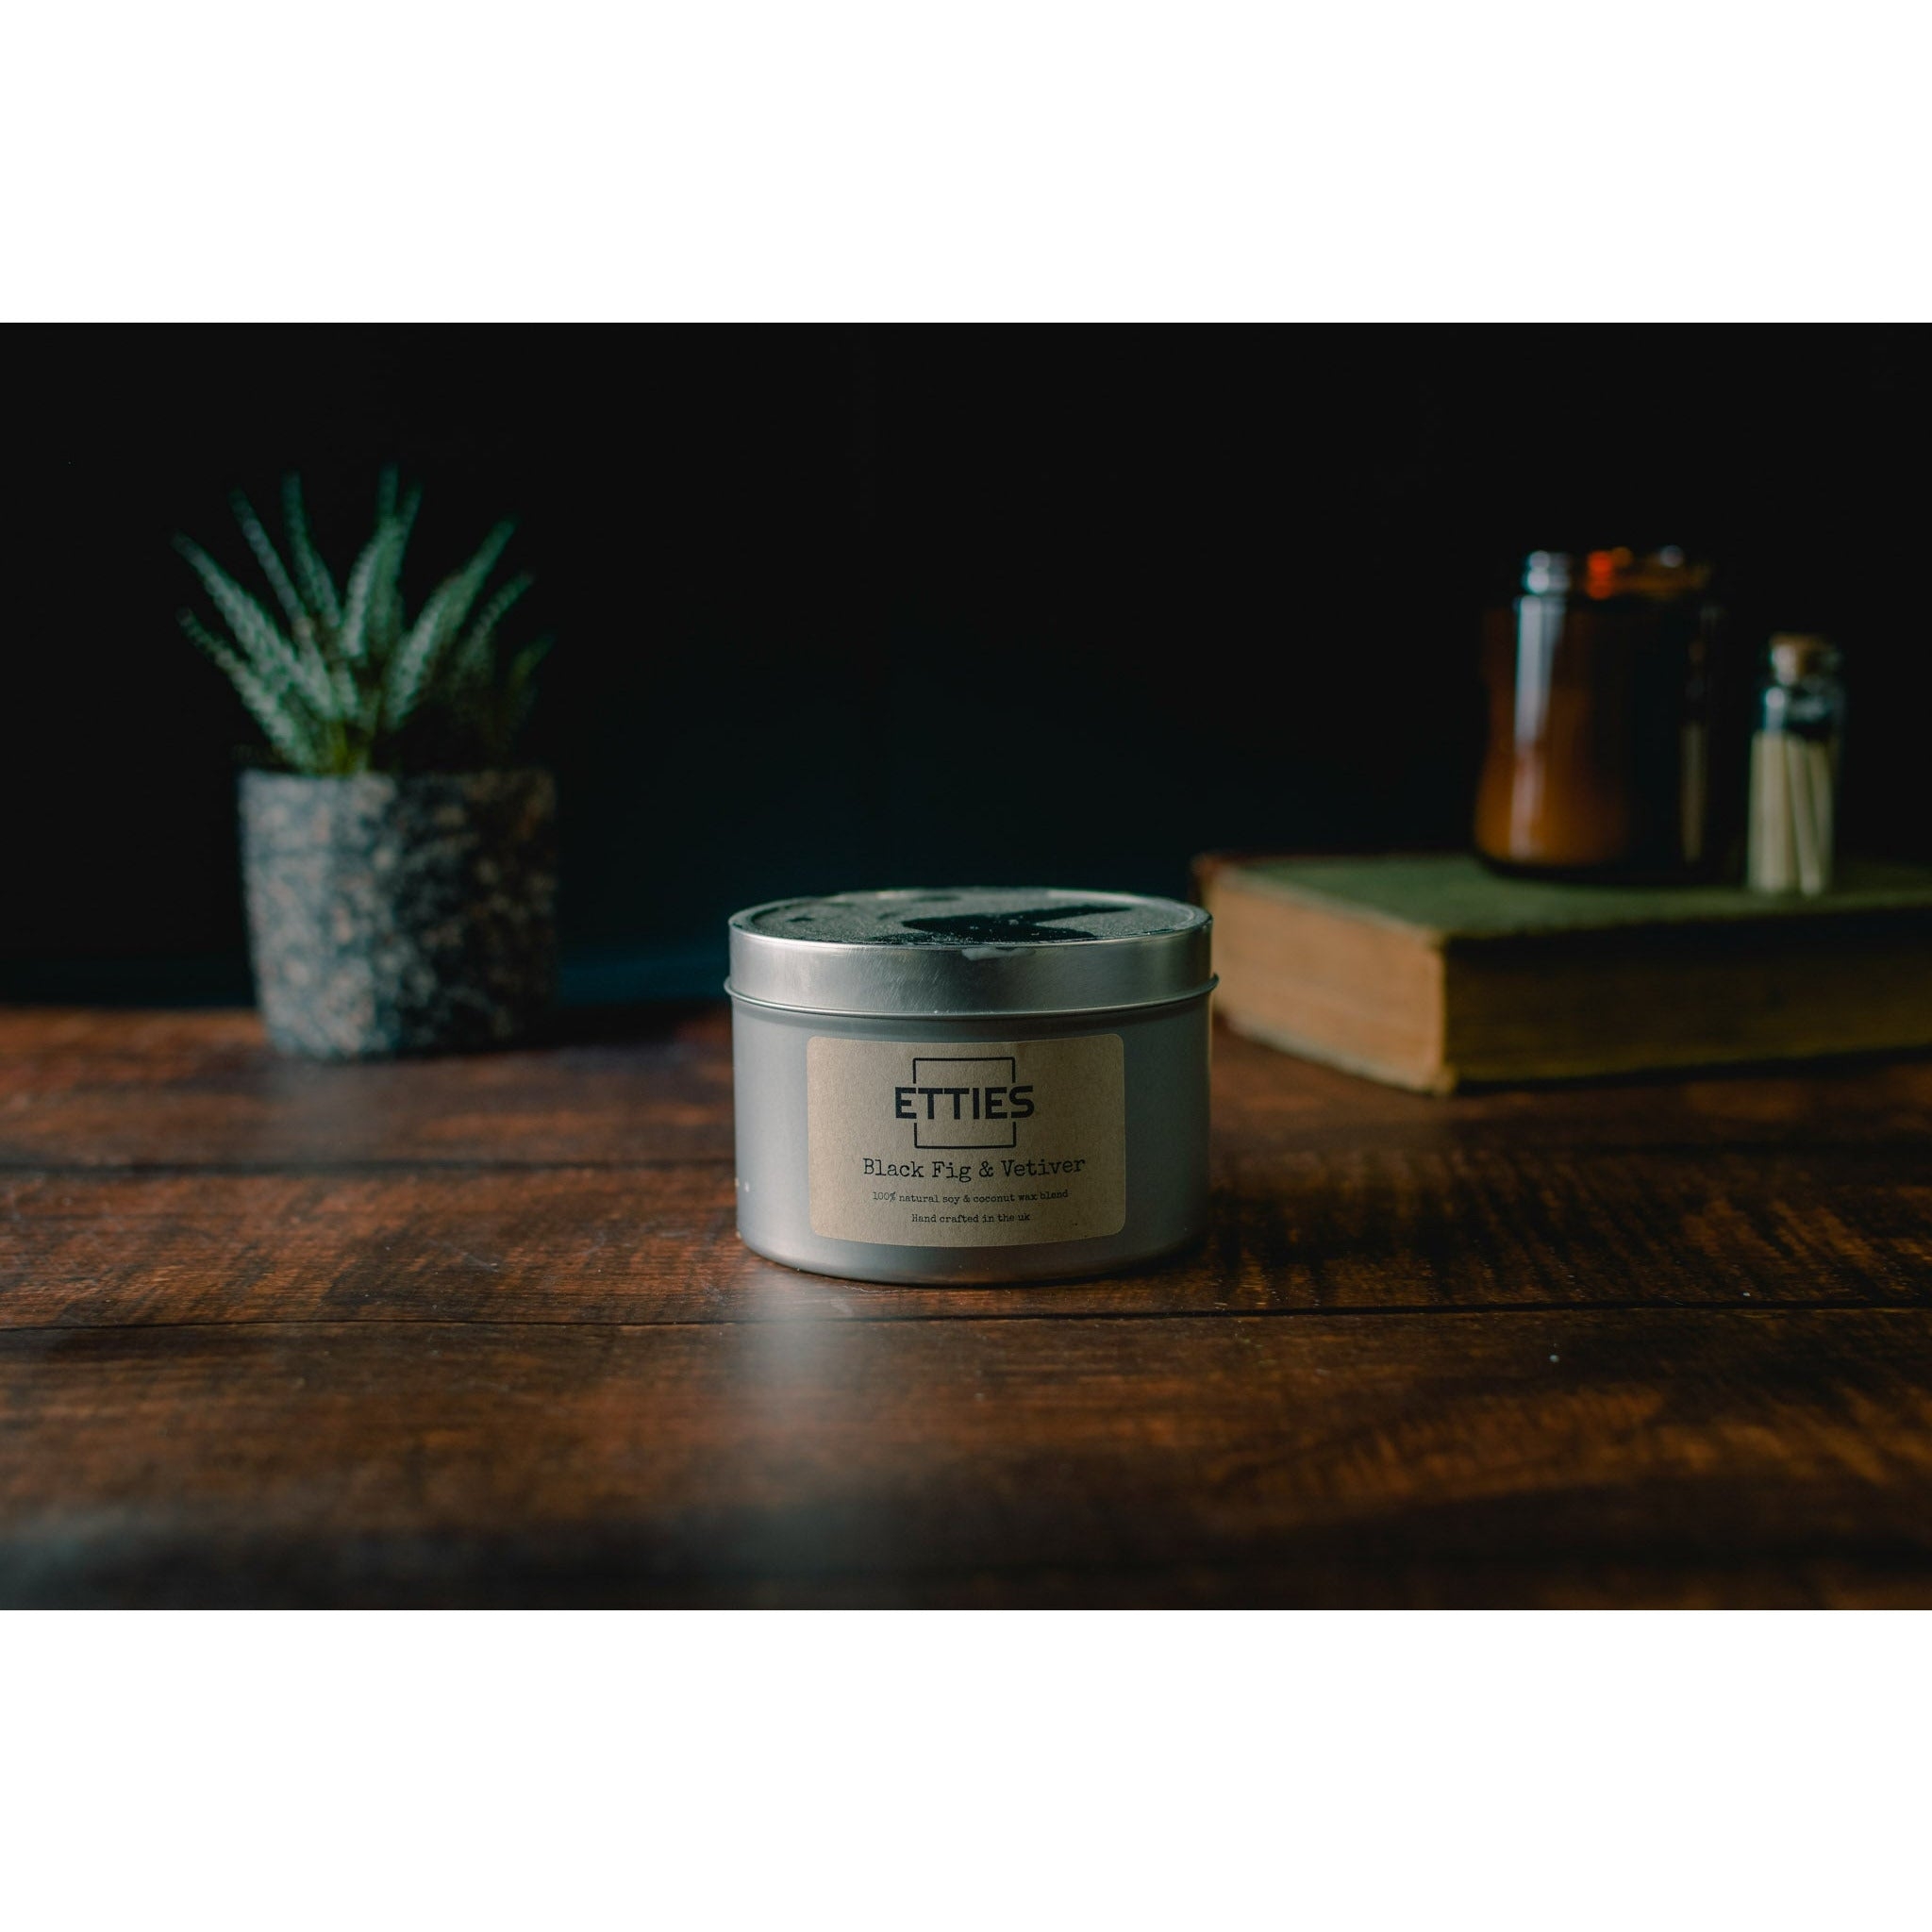 Black Fig & Vetiver Luxury Candle In TIn – 250ml – Etties Candles